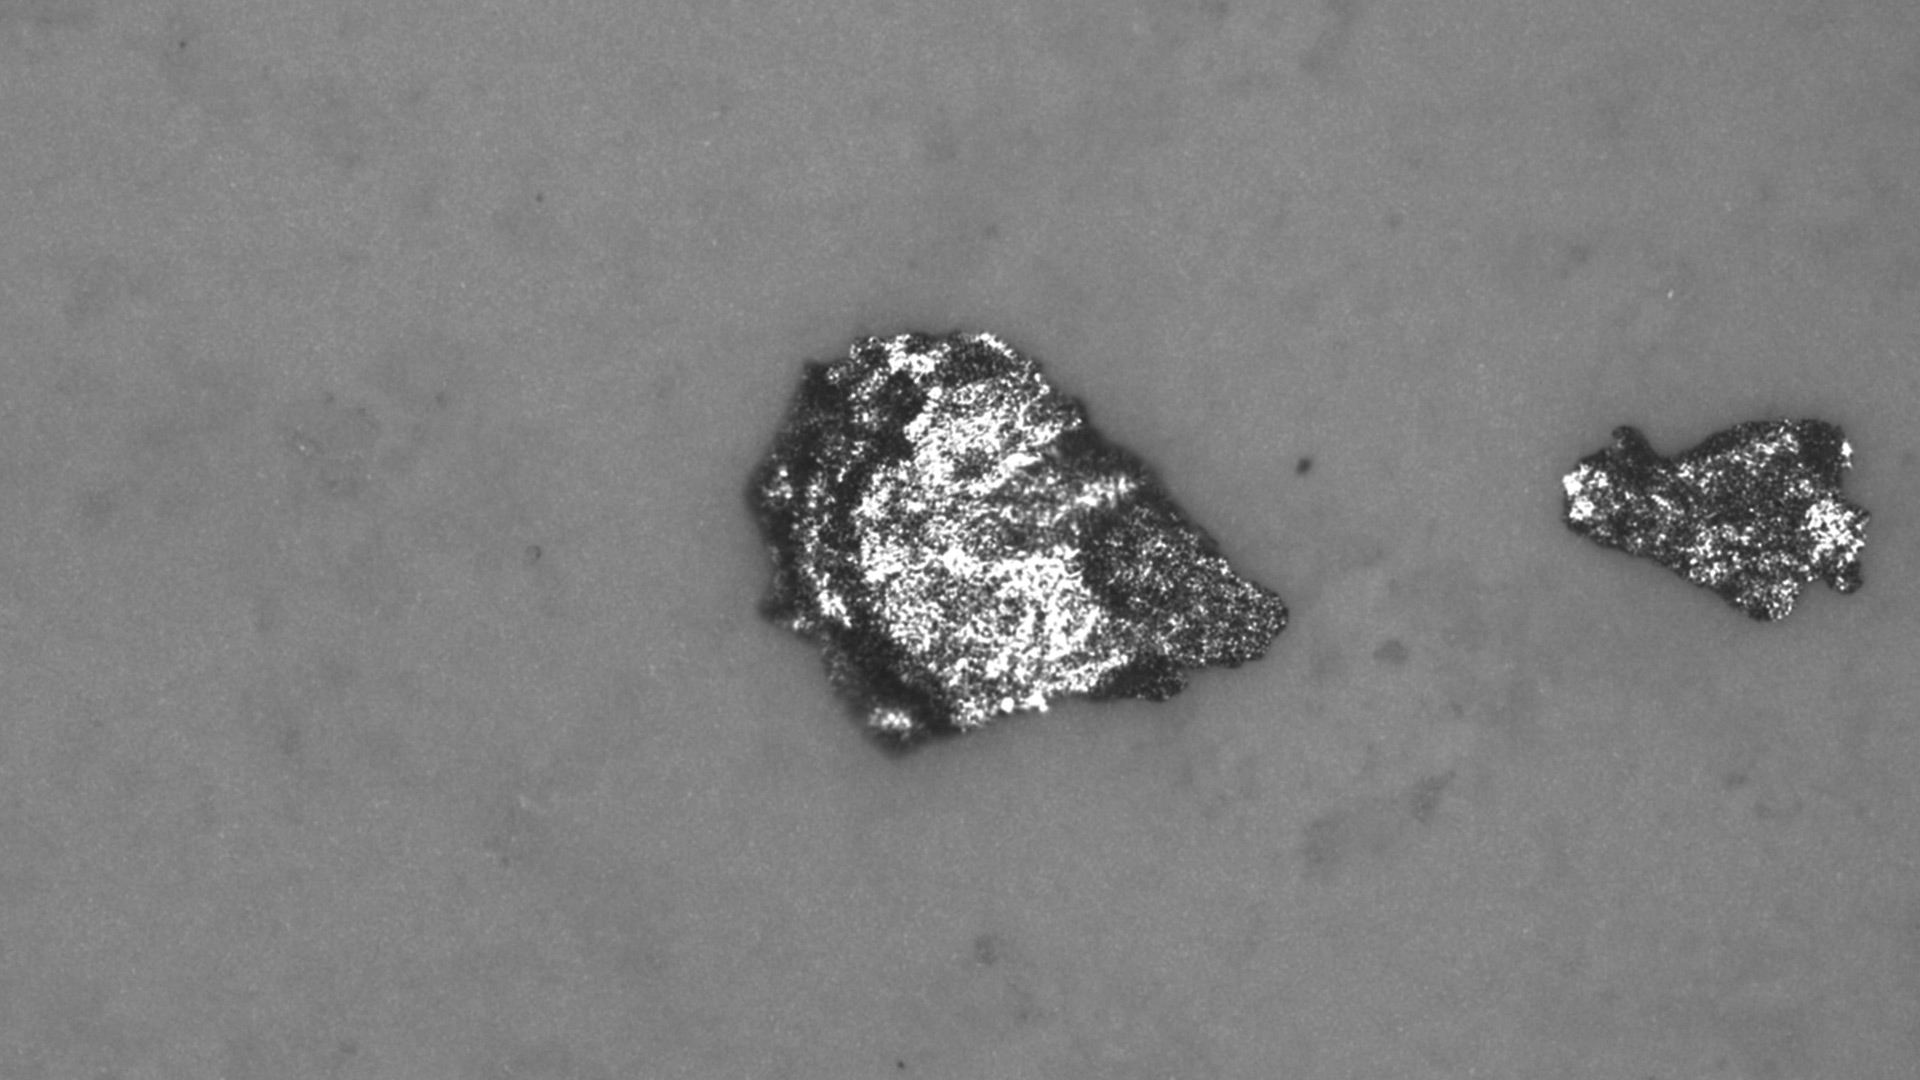 Example of a steel particle which could be found during cleanliness analysis of parts and components. 